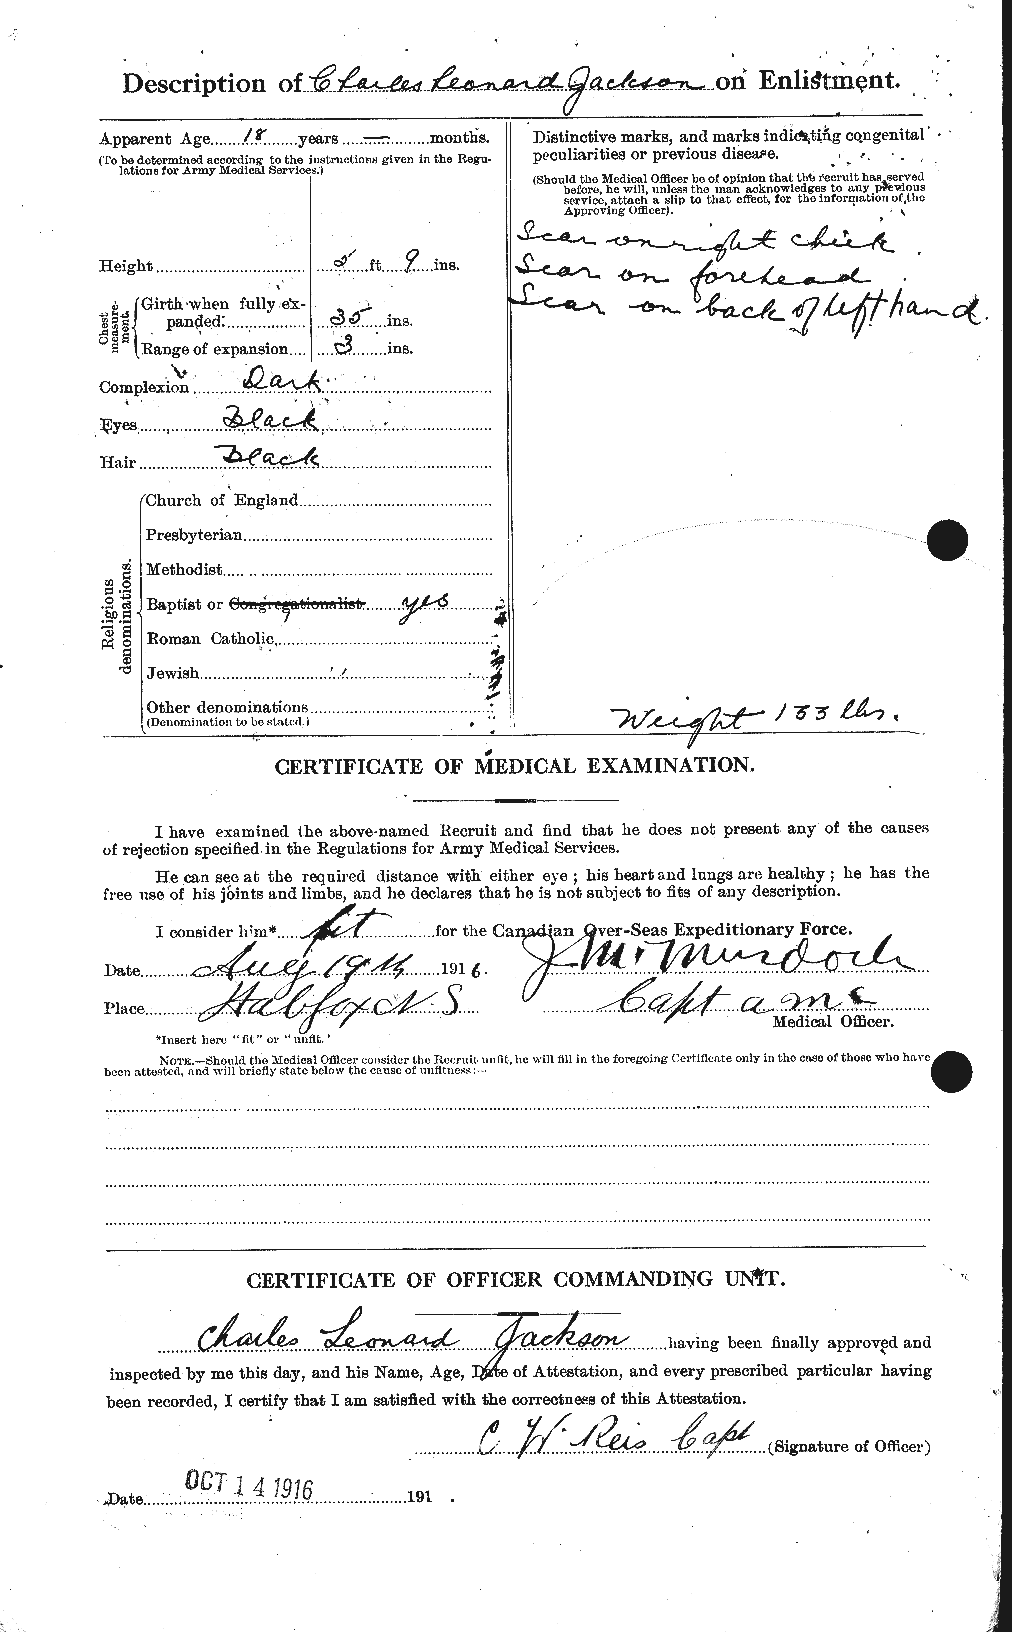 Personnel Records of the First World War - CEF 411827b